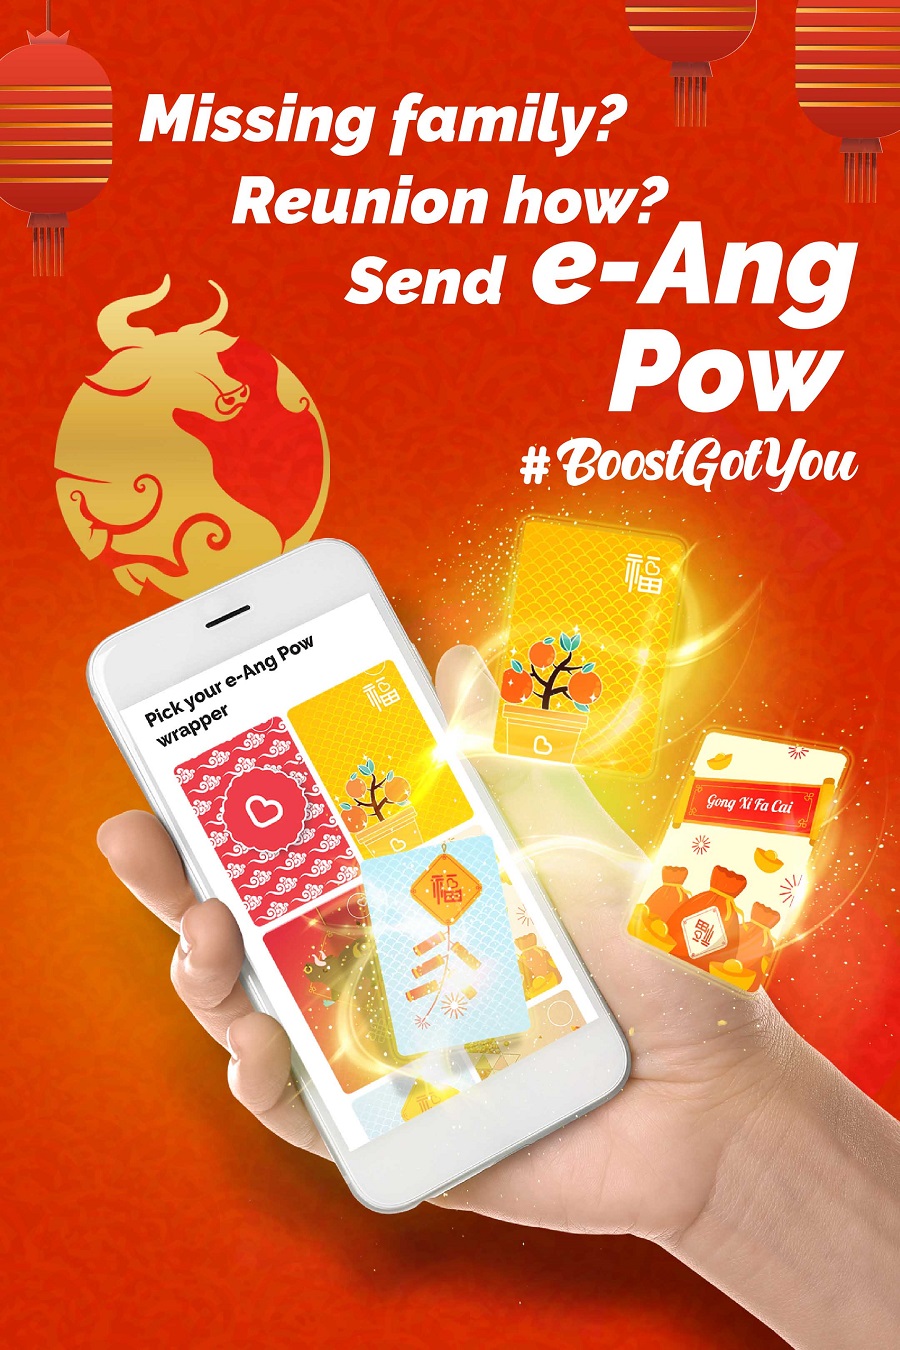 Send e Ang Pow with Boost this Ox picious CNY